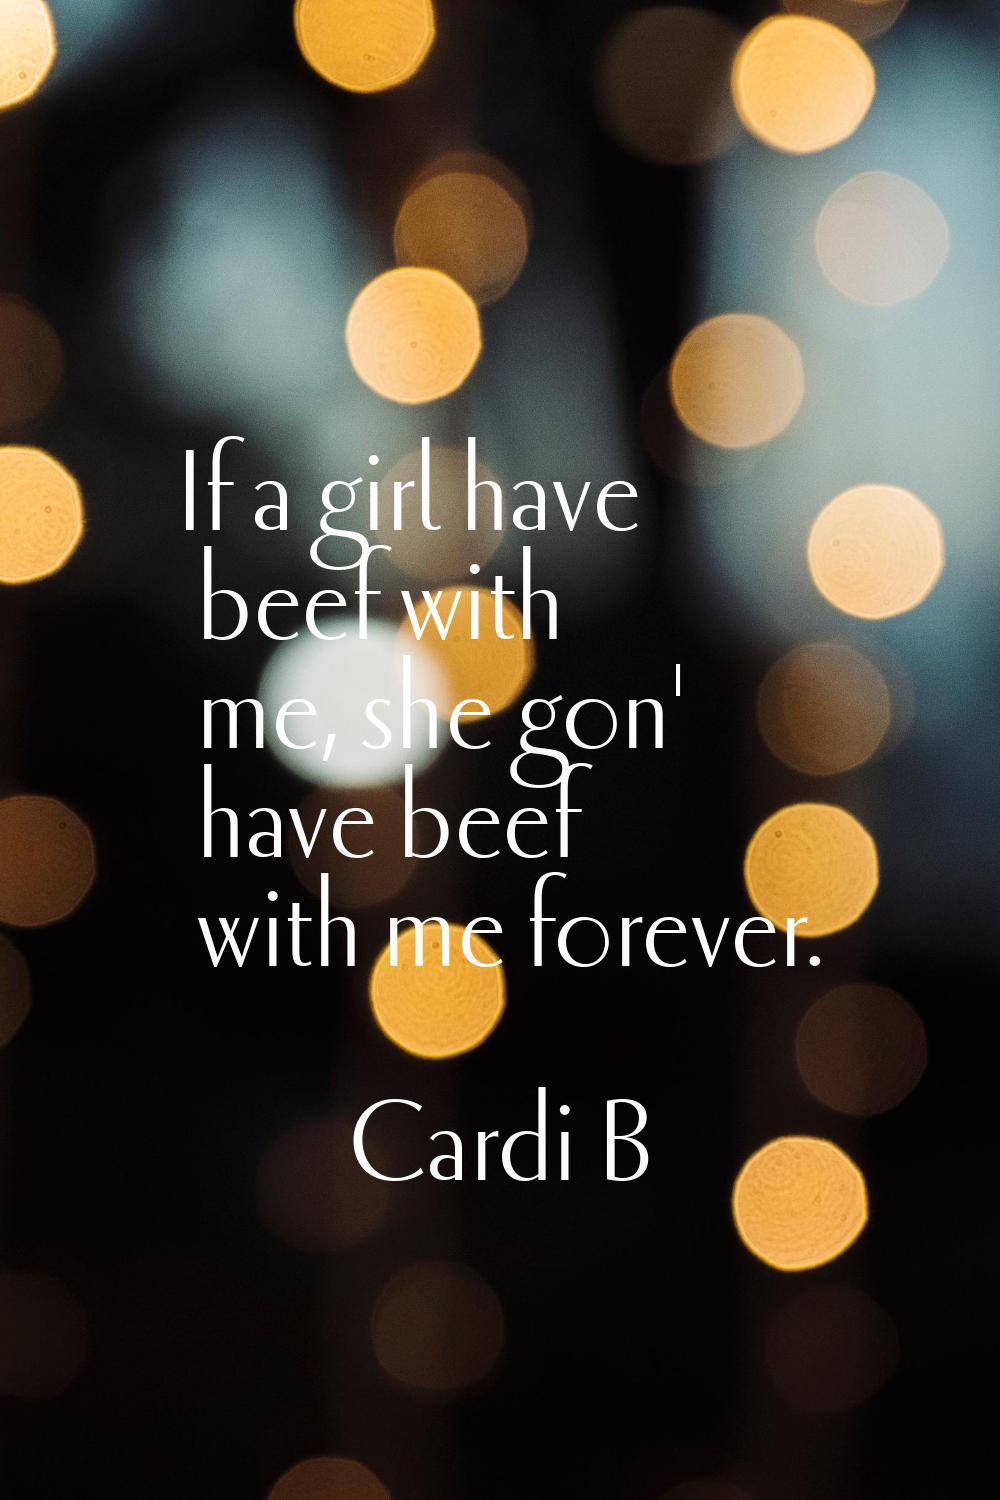 If a girl have beef with me, she gon' have beef with me forever.